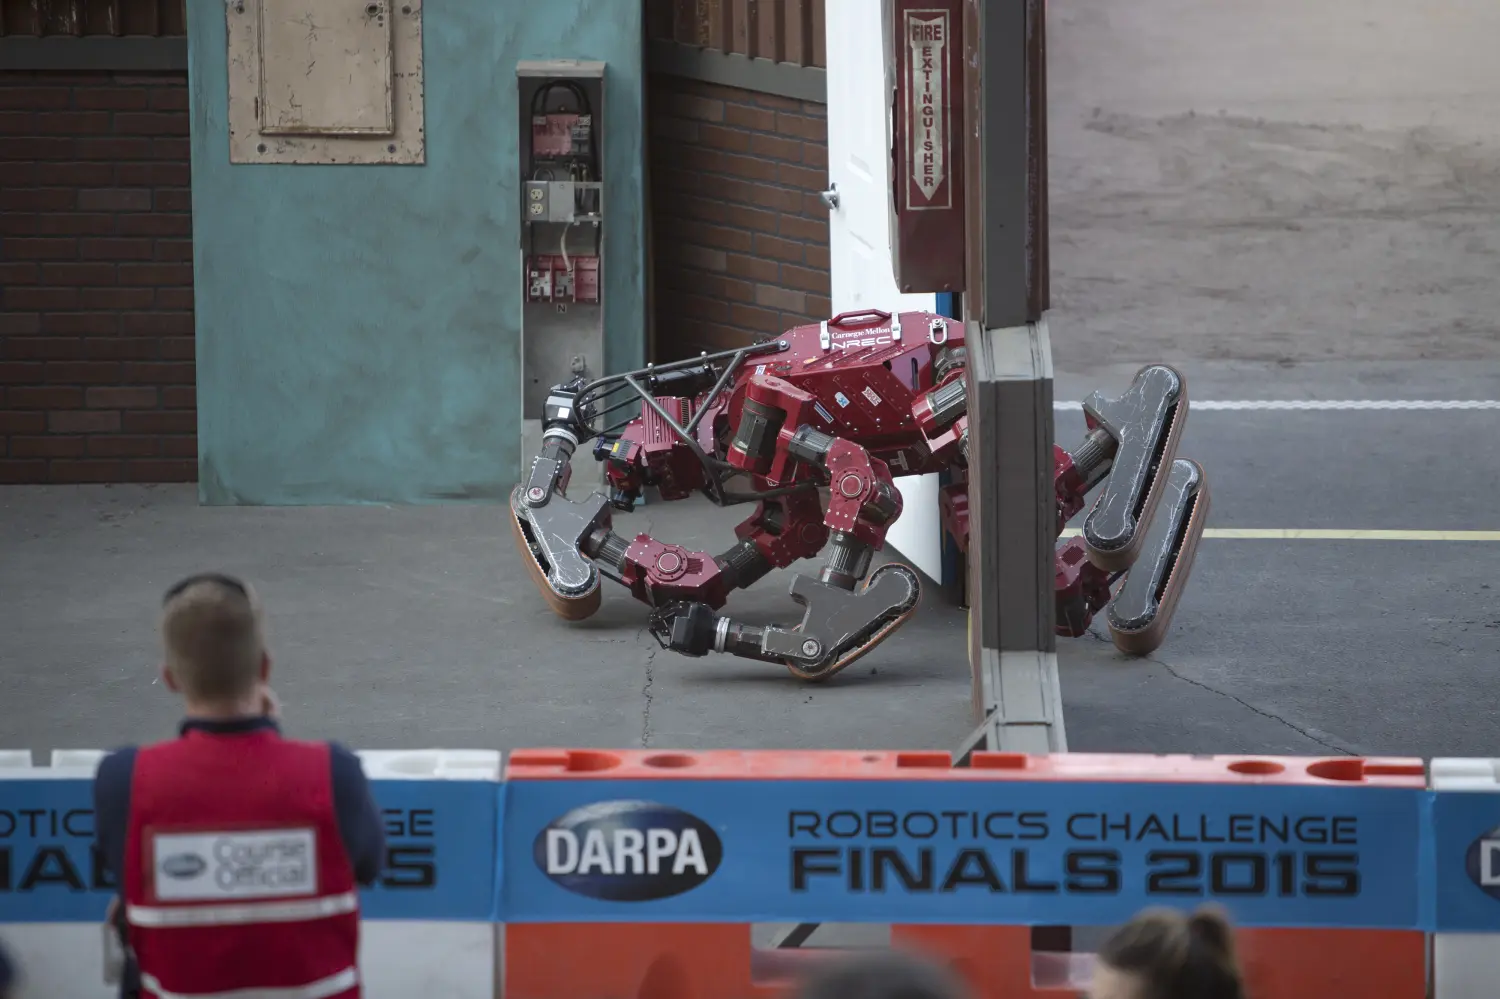 The Tartan Rescue team CHIMP (CMU Highly Intelligent Mobile Platform) robot falls down while trying to go through a doorway on a simulated disaster-response course on day one of the DARPA (Defense Advanced Research Projects Agency) Robotics Challenge finals in Pomona, California